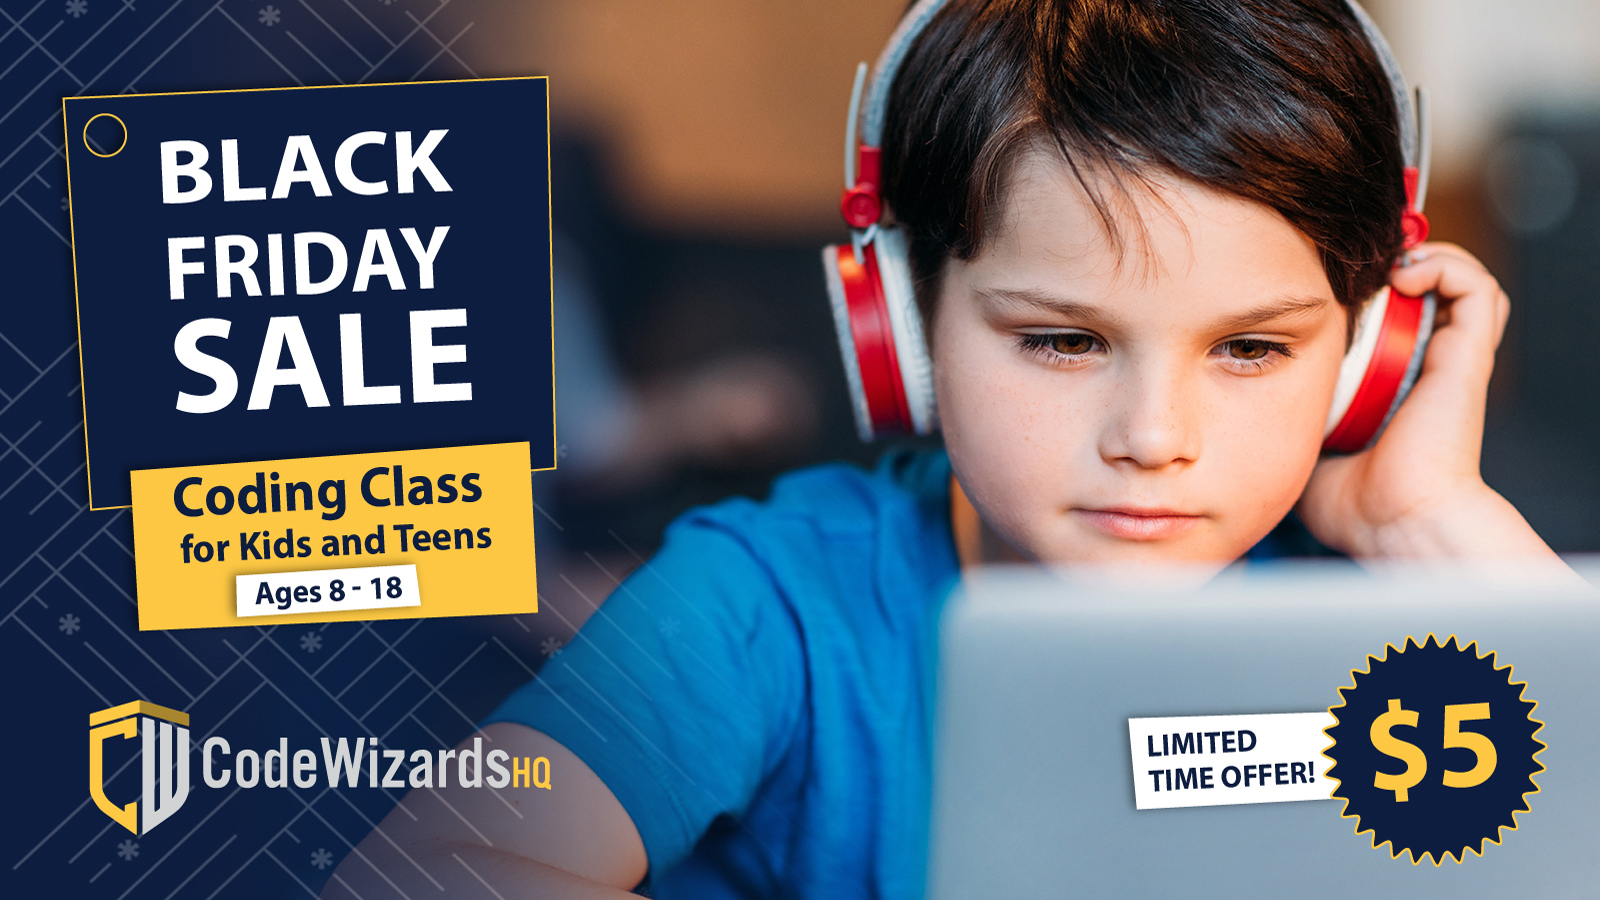 CodeWizardsHQ Gears Up for Its Biggest Black Friday Yet: $5 for 1-hour coding class